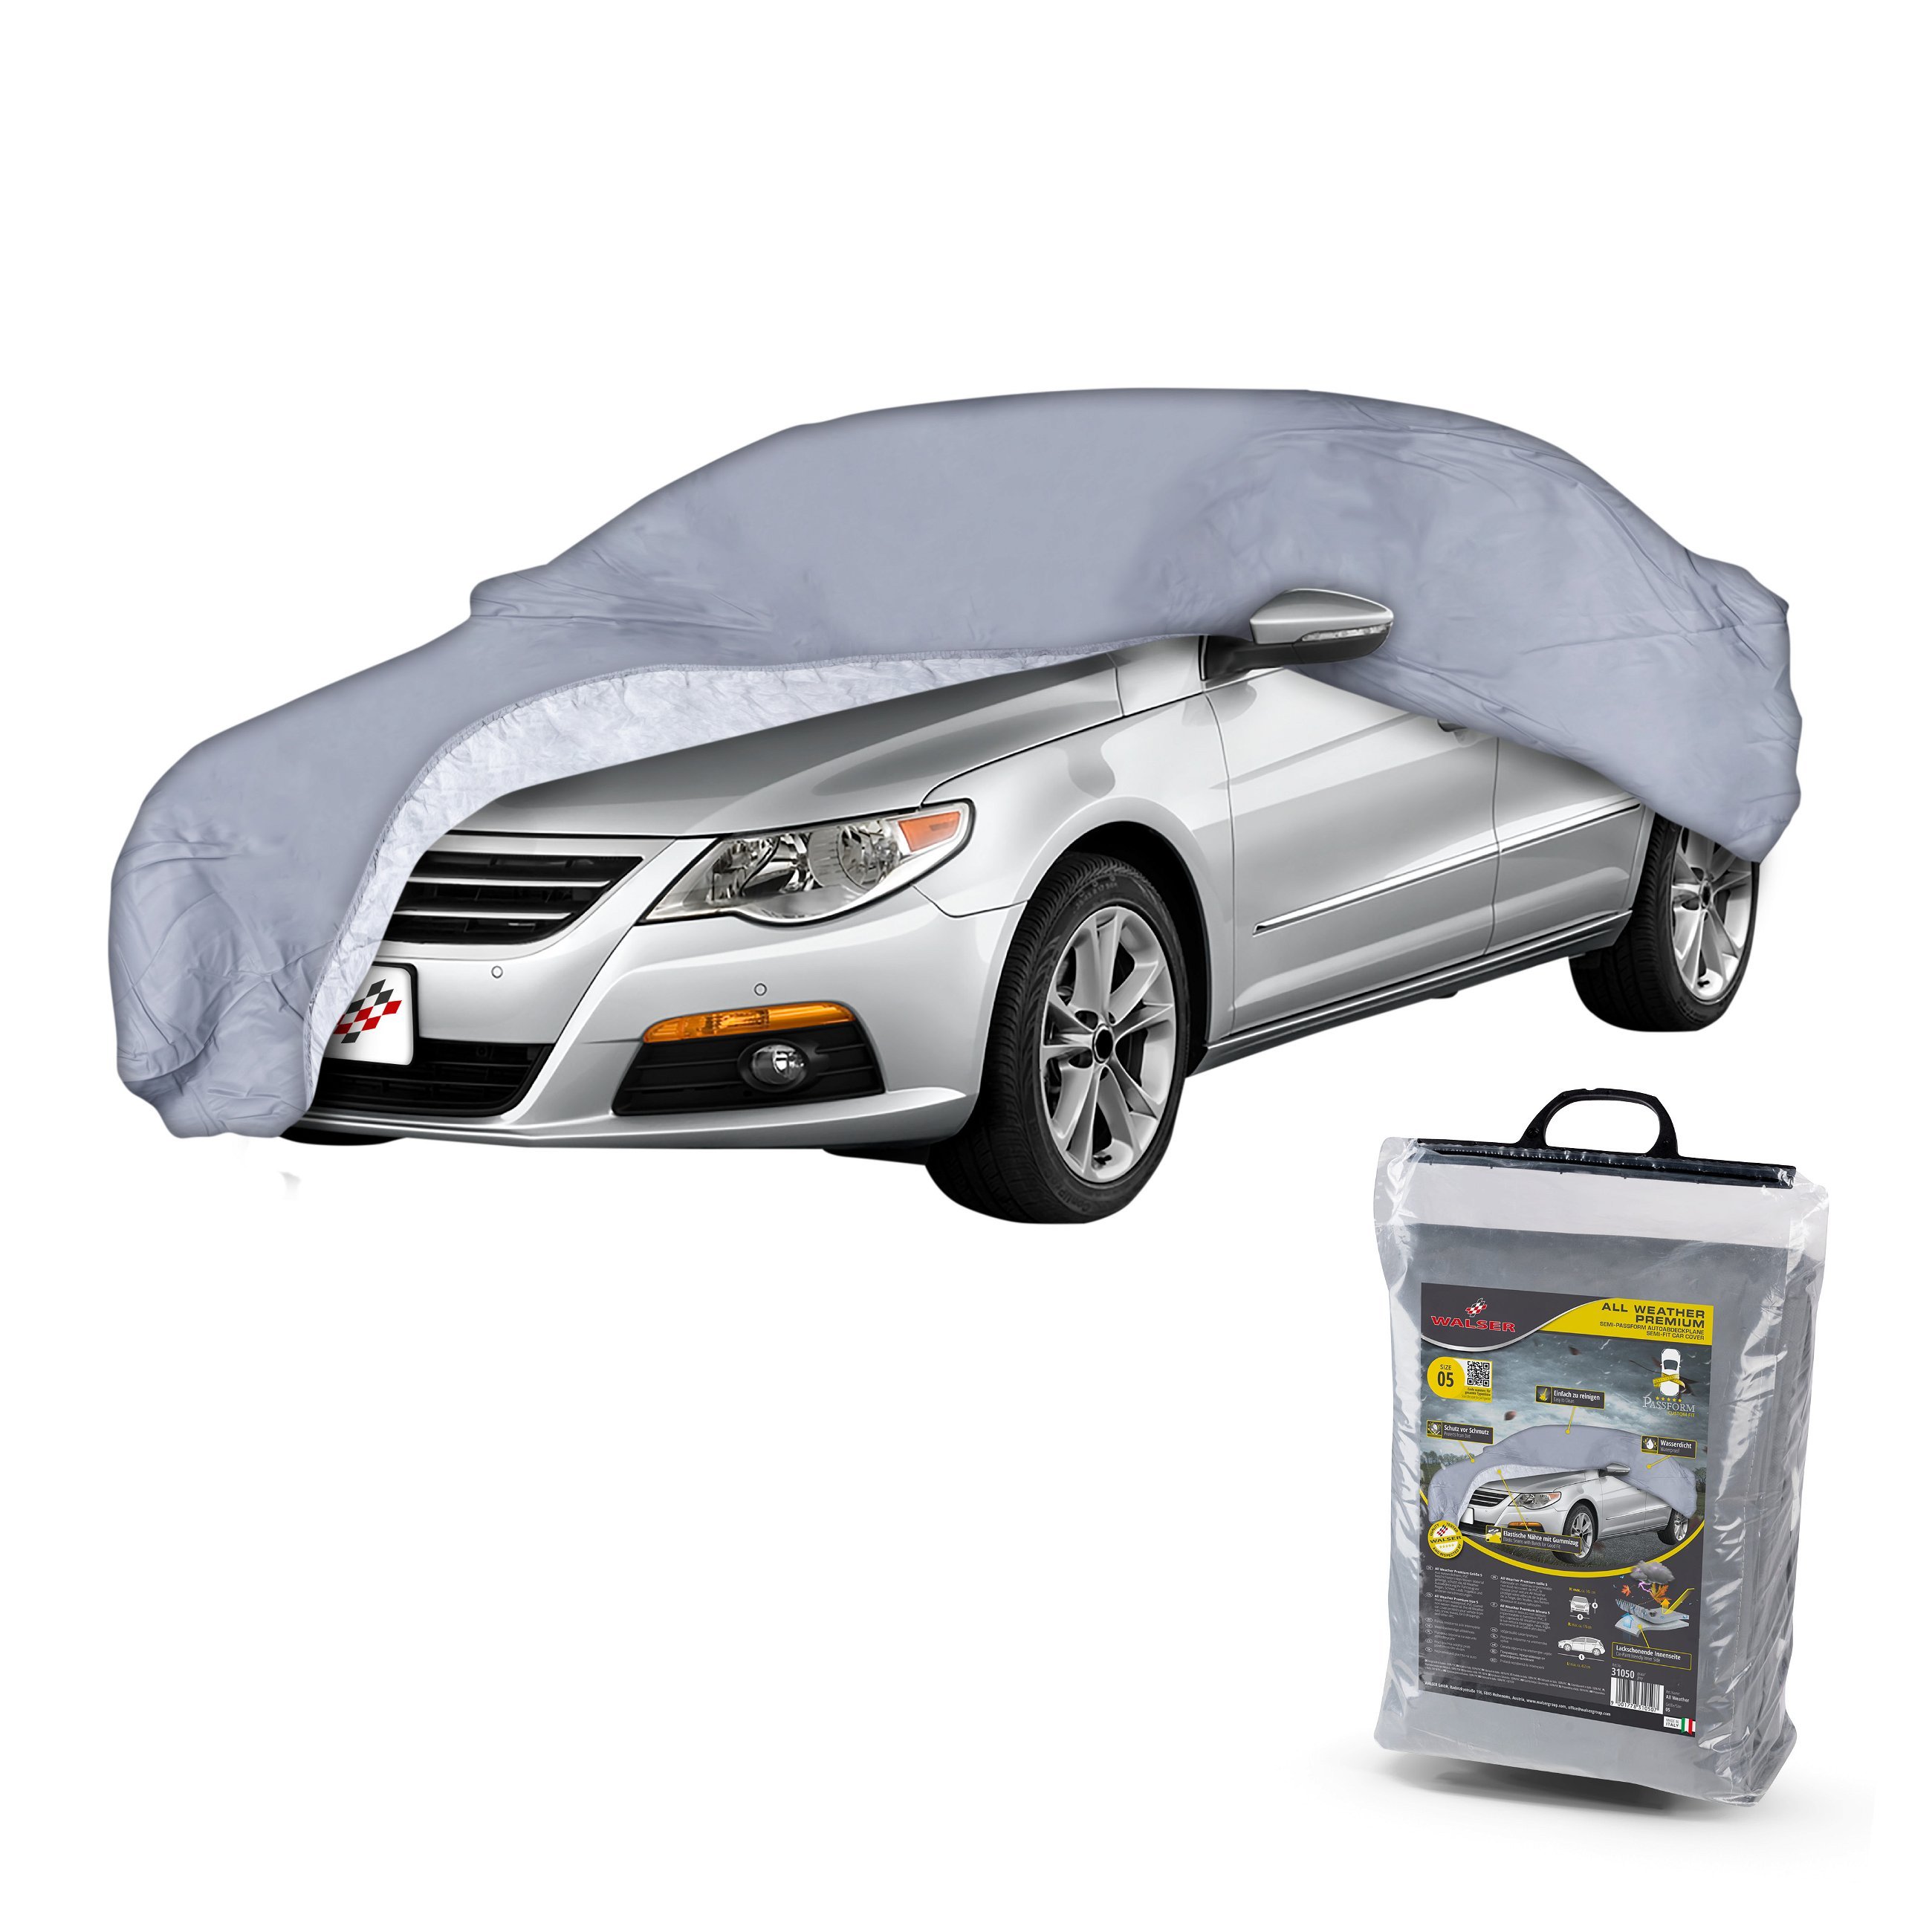 Car cover All Weather Premium size 5 grey, Car covers, Covers & Garages